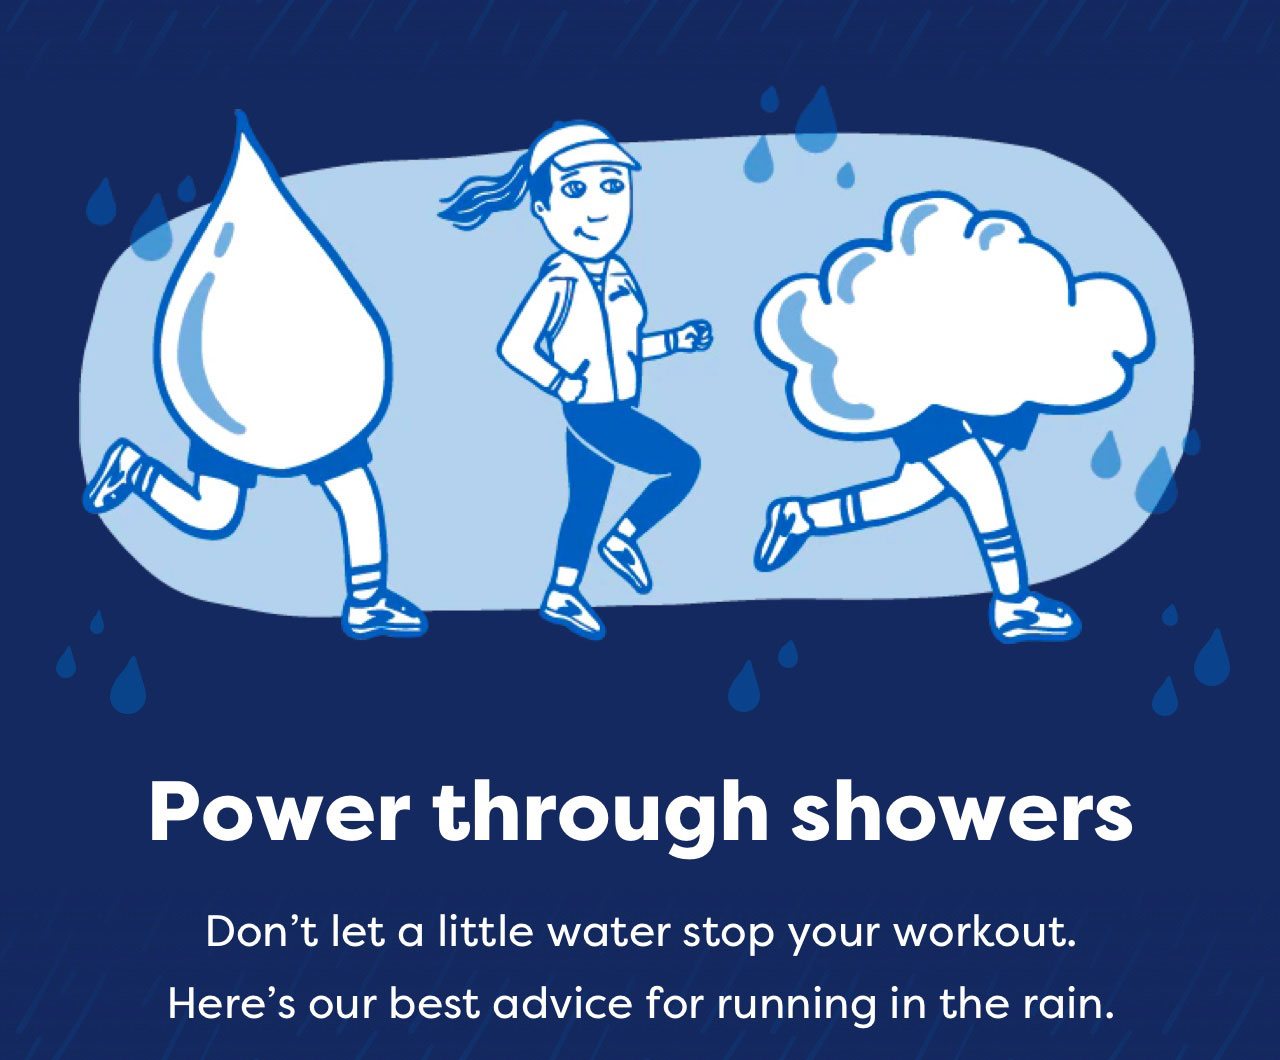 Power through showers - Don't let a little water stop your workout. Here's our best advice for running in the rain.